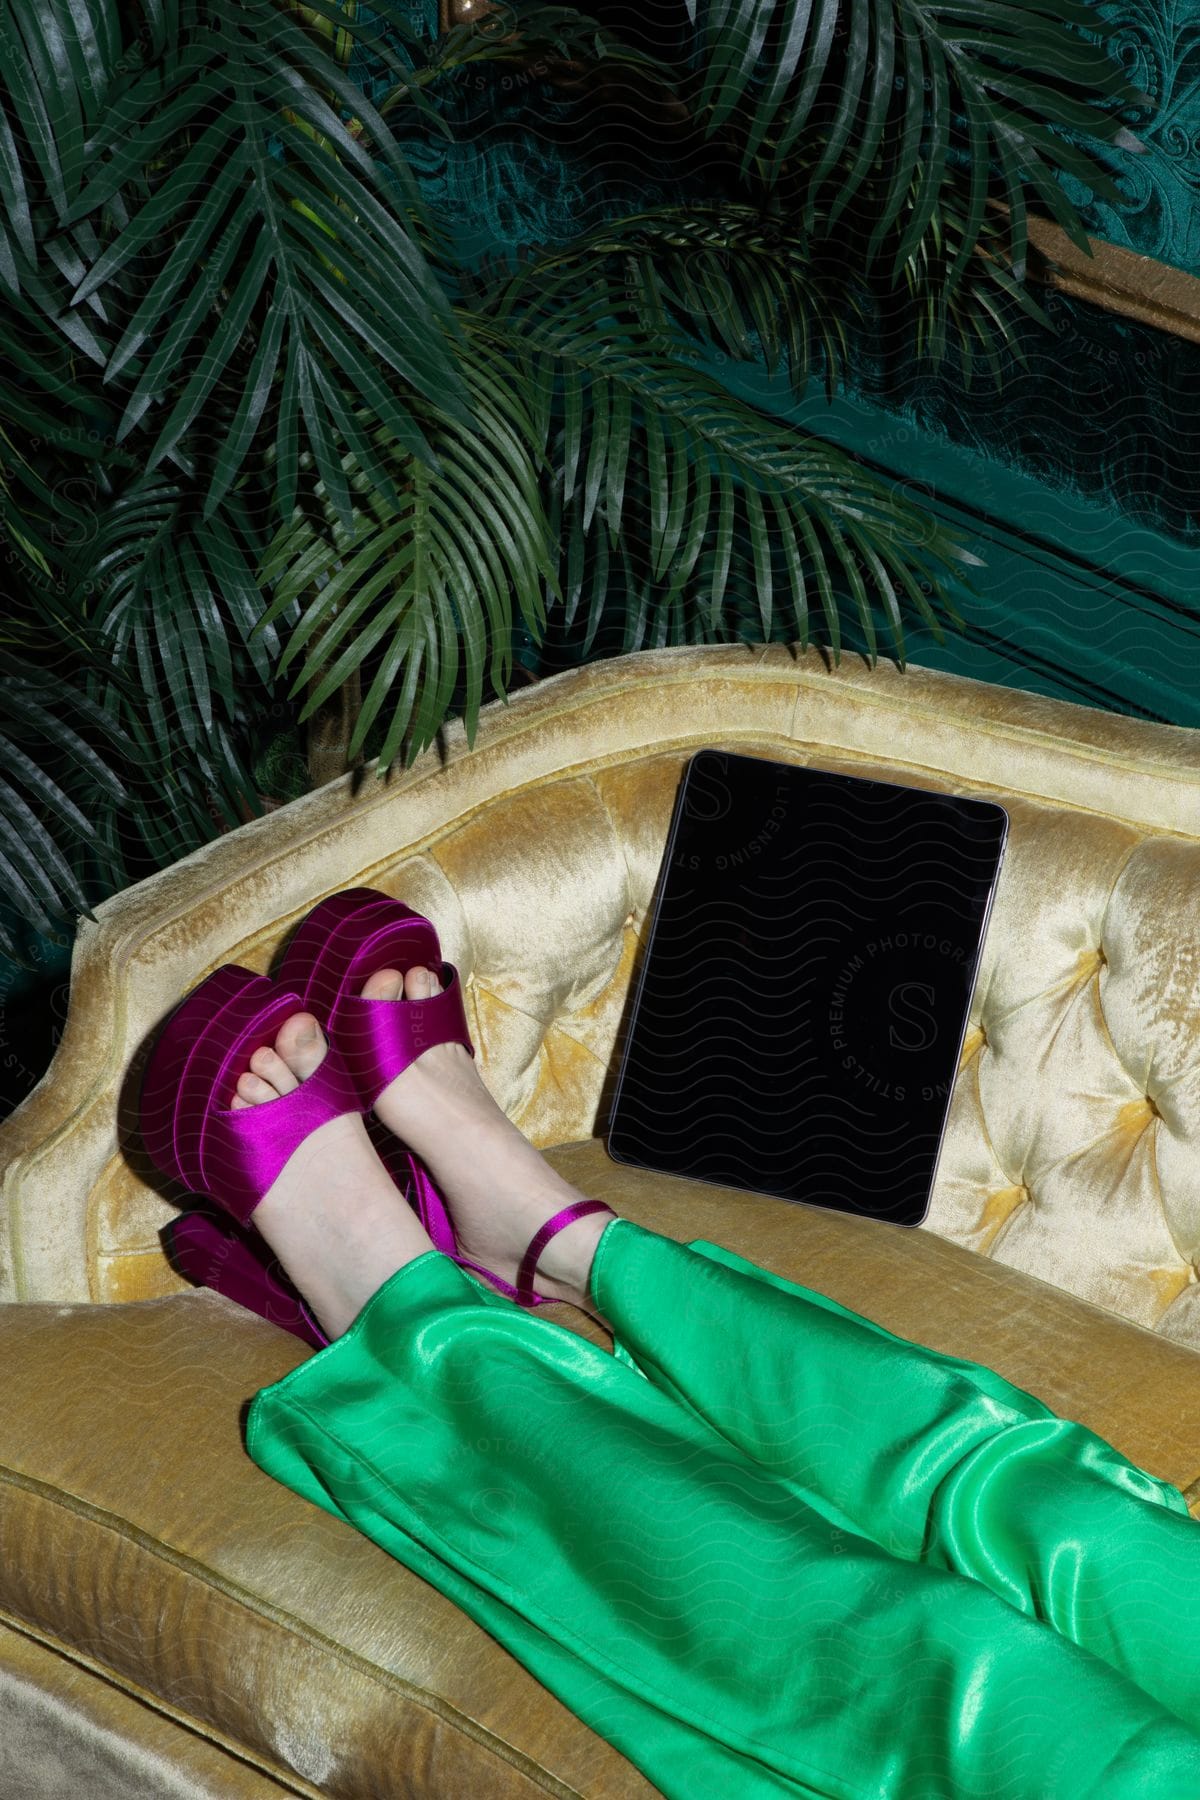 A woman in green pants and purple high heels relaxes on a worn-out golden couch in a green-walled room with golden borders.